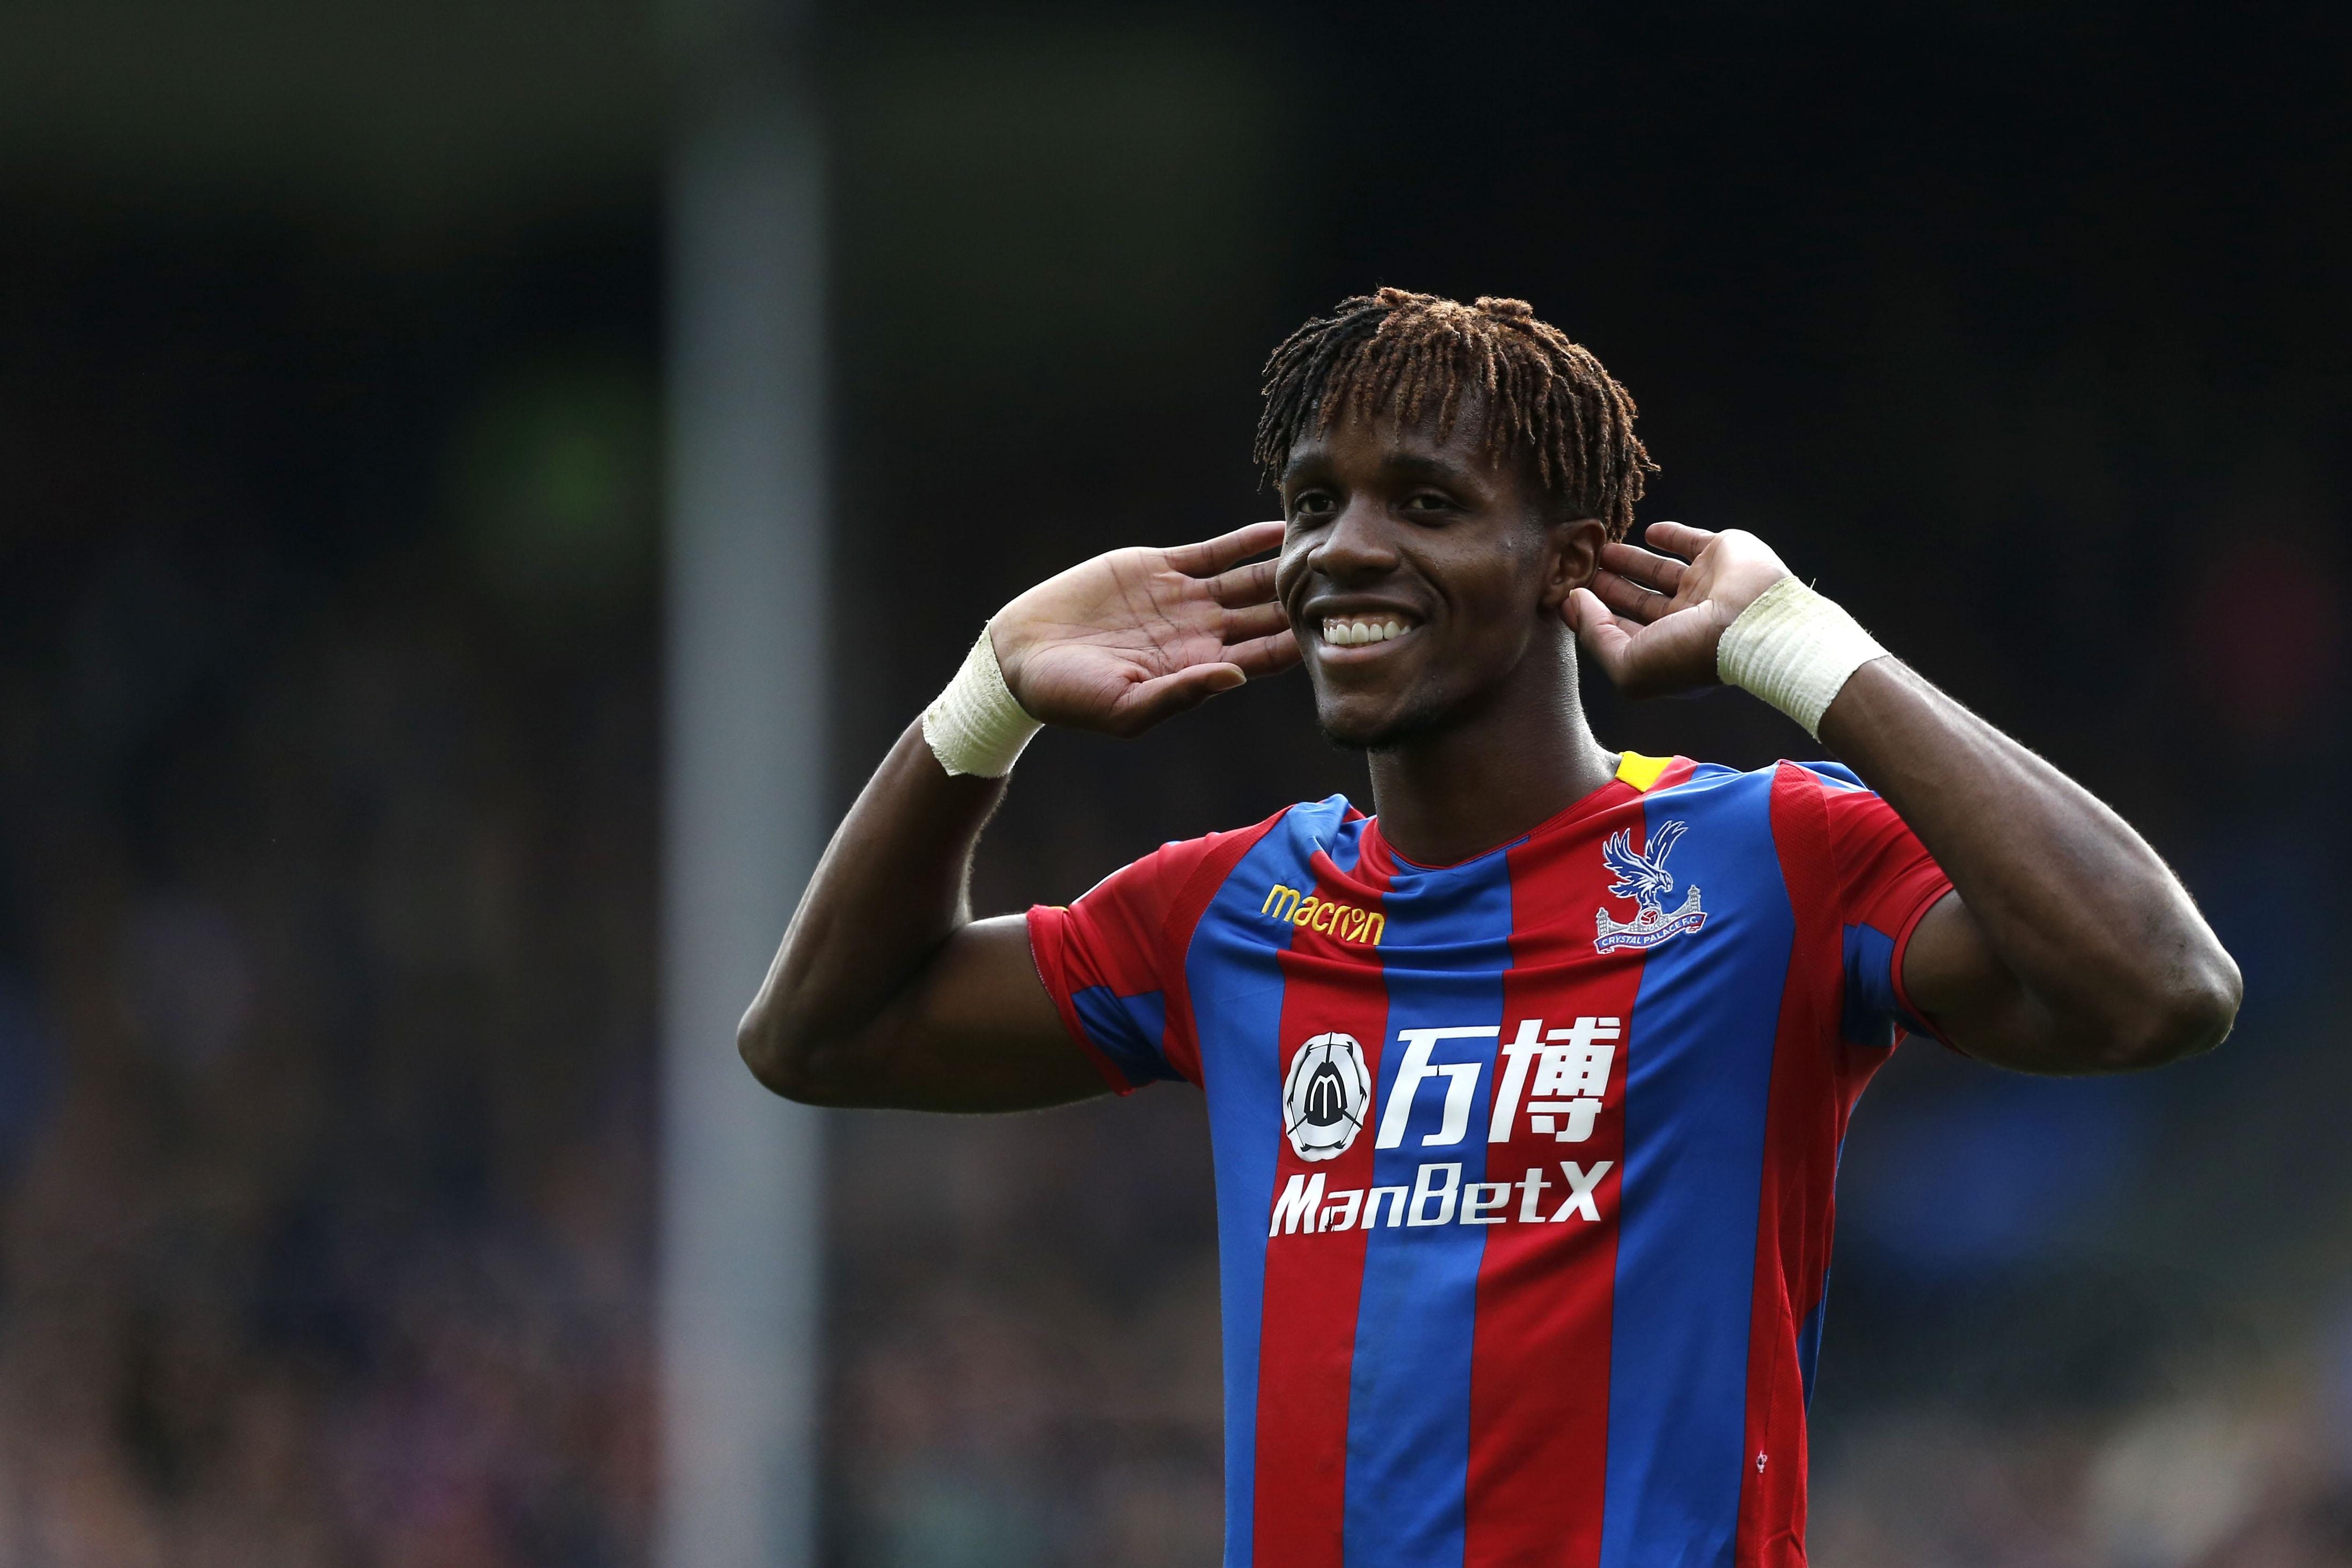 Crystal Palace's Ivorian striker Wilfried Zaha gestures to supporters during the English Premier League football match between Crystal Palace and West Ham United at Selhurst Park in south London on October 28, 2017. / AFP PHOTO / Ian KINGTON / RESTRICTED TO EDITORIAL USE. No use with unauthorized audio, video, data, fixture lists, club/league logos or 'live' services. Online in-match use limited to 75 images, no video emulation. No use in betting, games or single club/league/player publications.  /         (Photo credit should read IAN KINGTON/AFP/Getty Images)